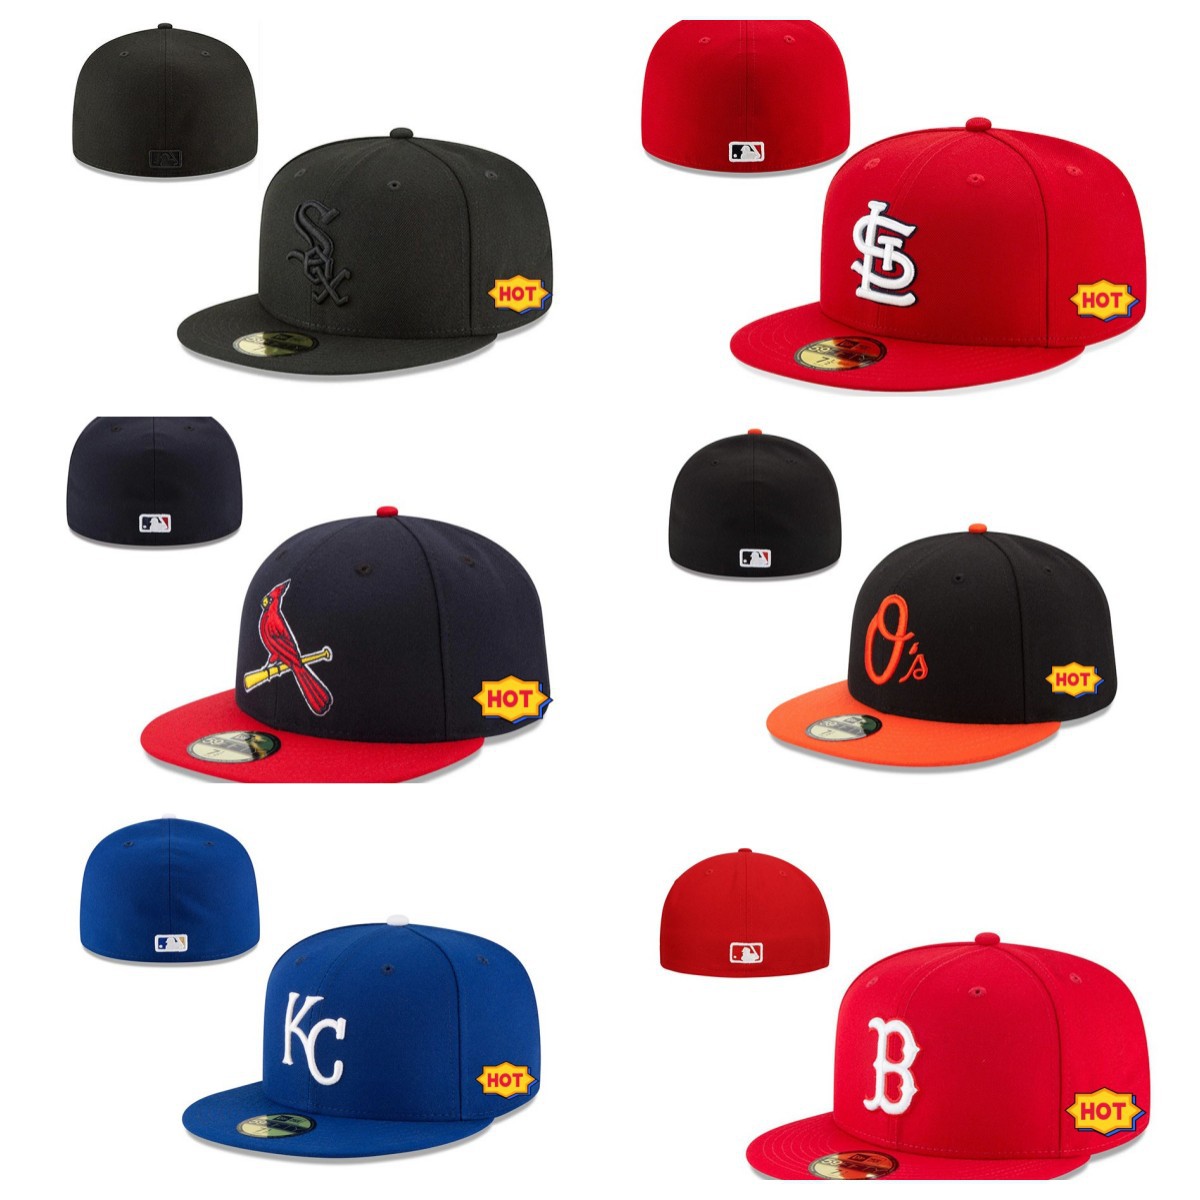 Customization Embroidery Flat Brim Snap Back Sports Baseball Snapback Hat Cap Manufacturer In Stock For Man